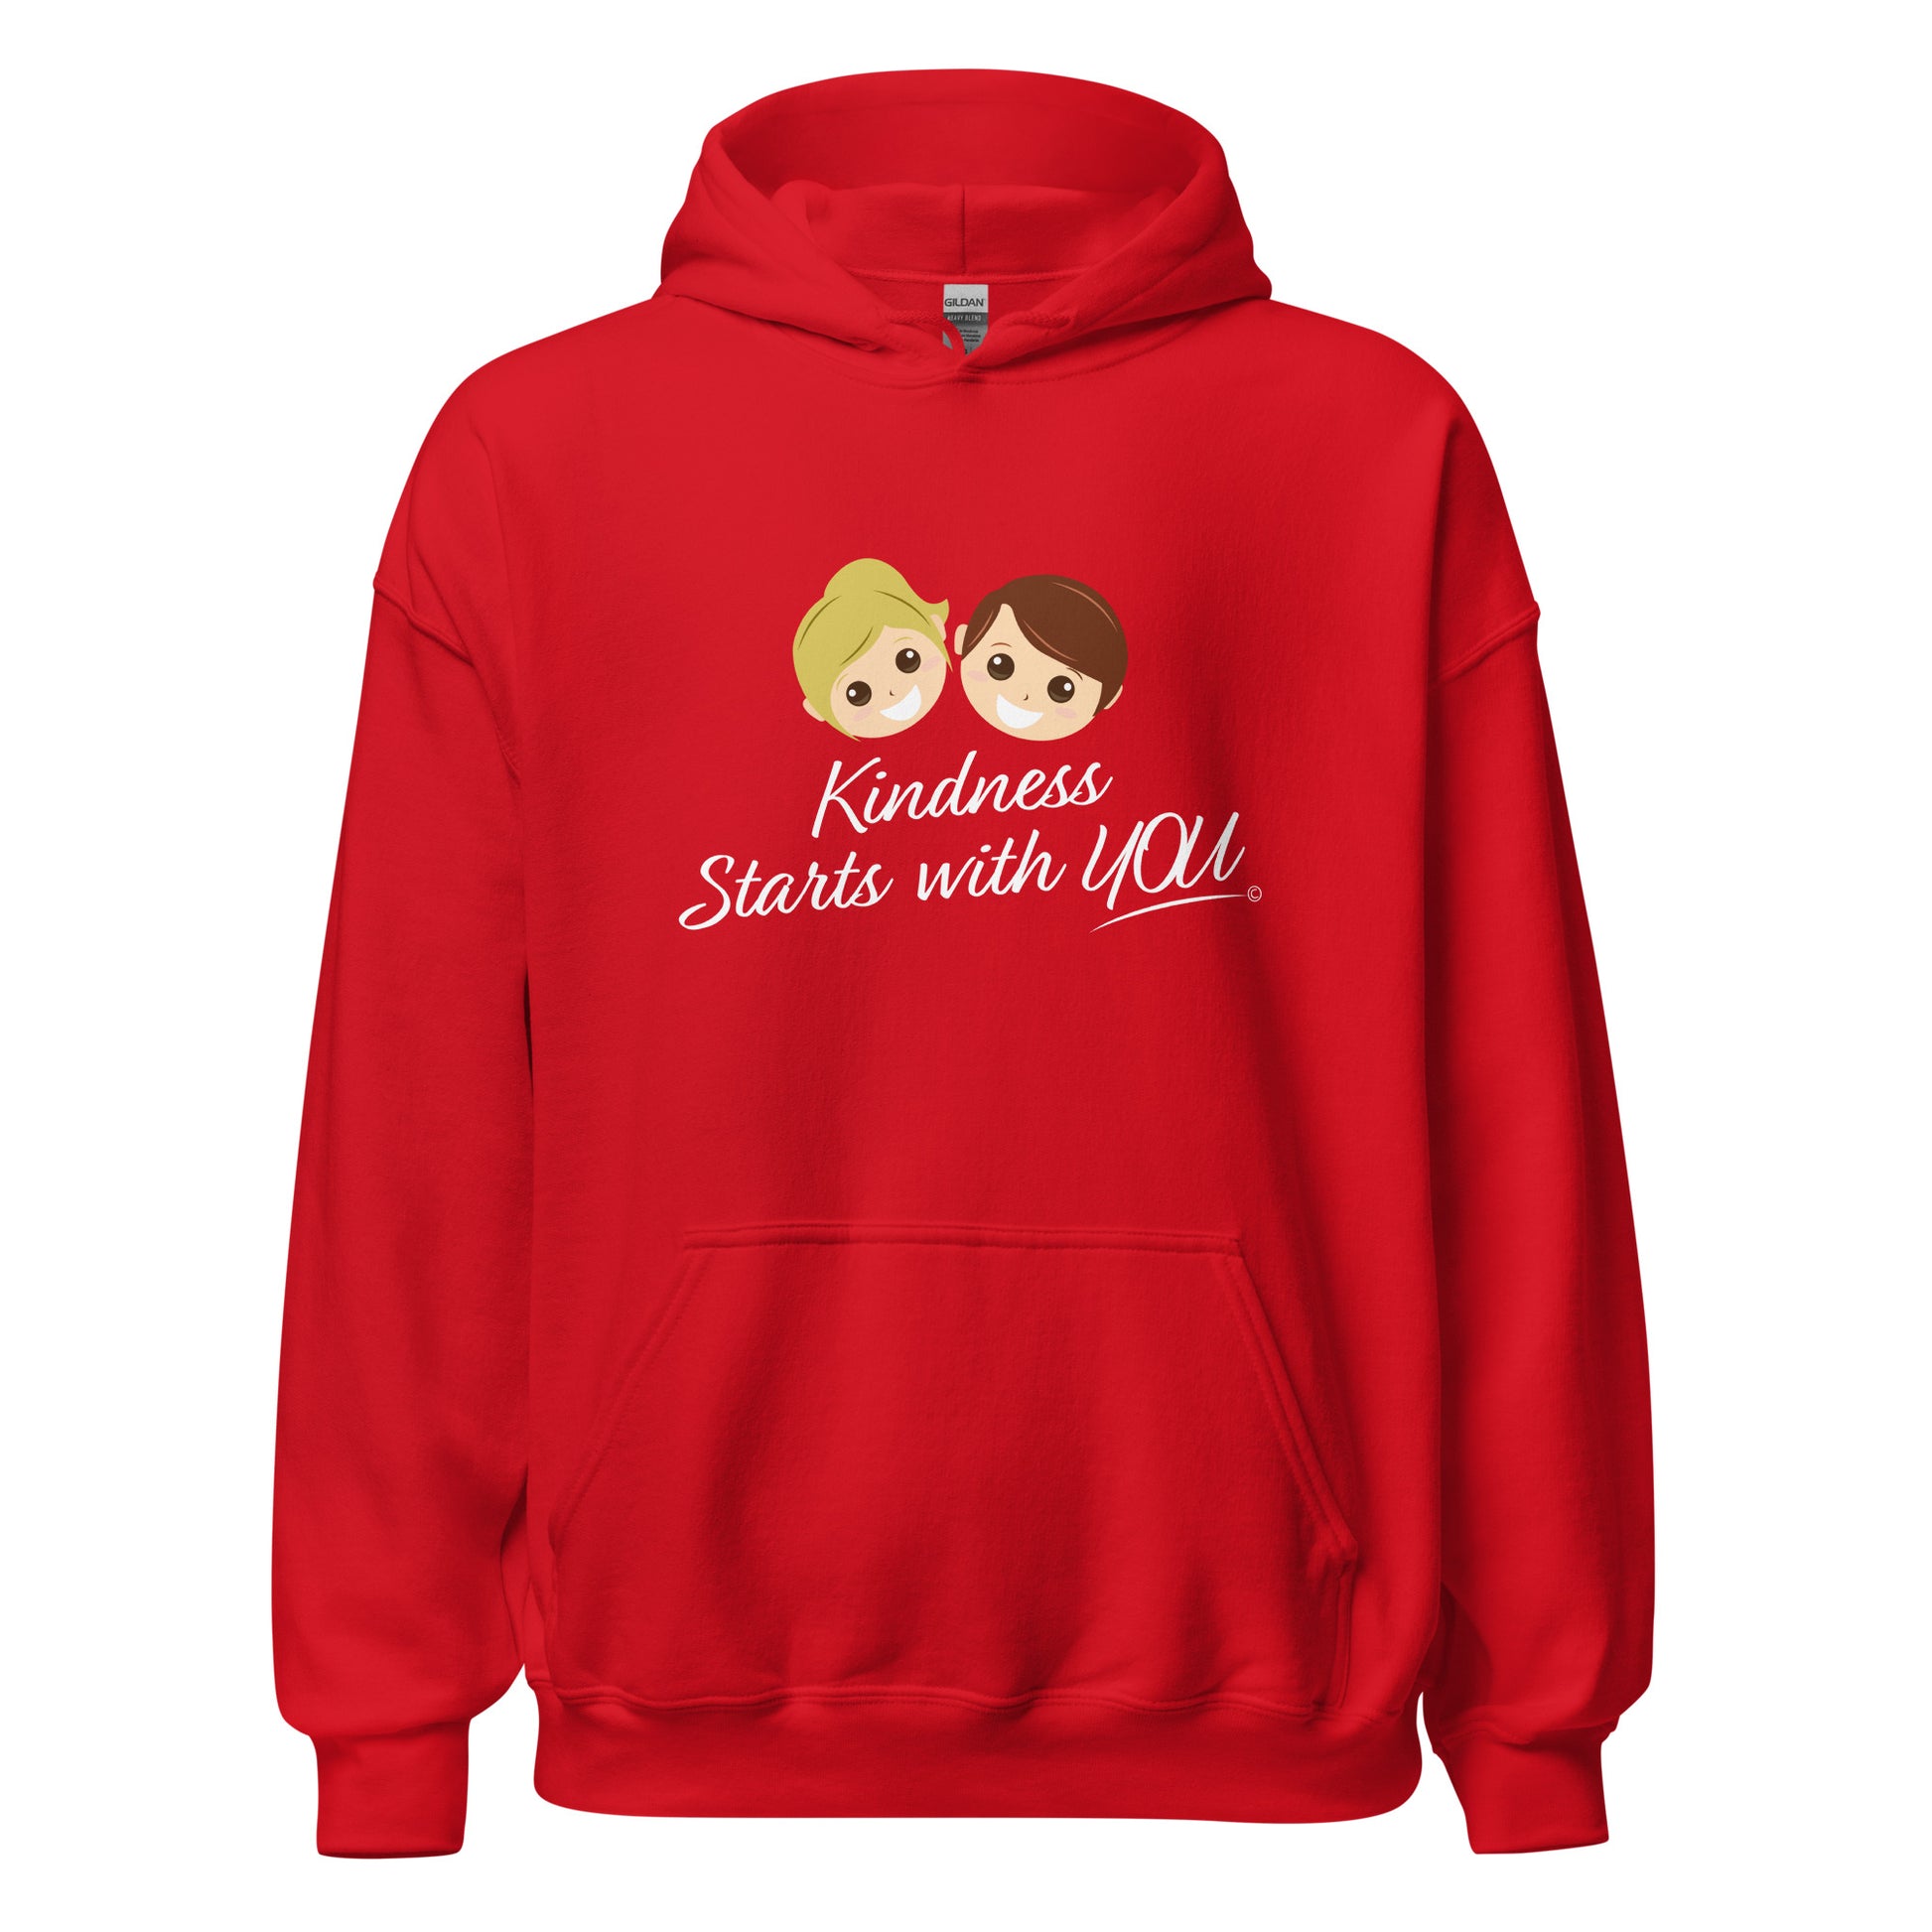 A cozy unisex hoodie in red, featuring the uplifting quote 'Kindness Starts with You' in bold lettering.